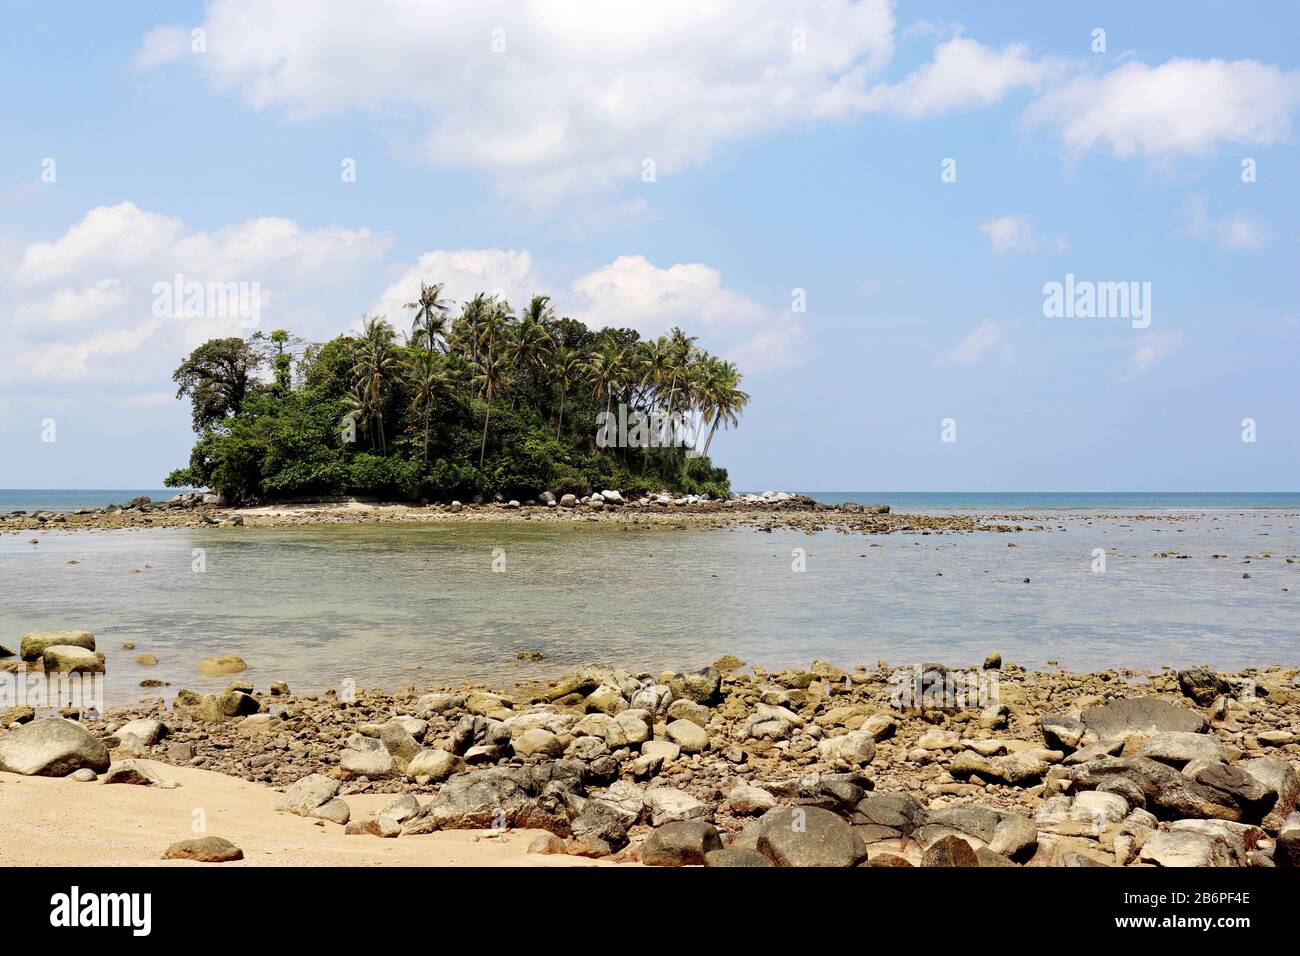 Tropical island with coconut palm trees in a ocean, picturesque view from the beach with rocks. Colorful seascape with blue sky and white clouds Stock Photo